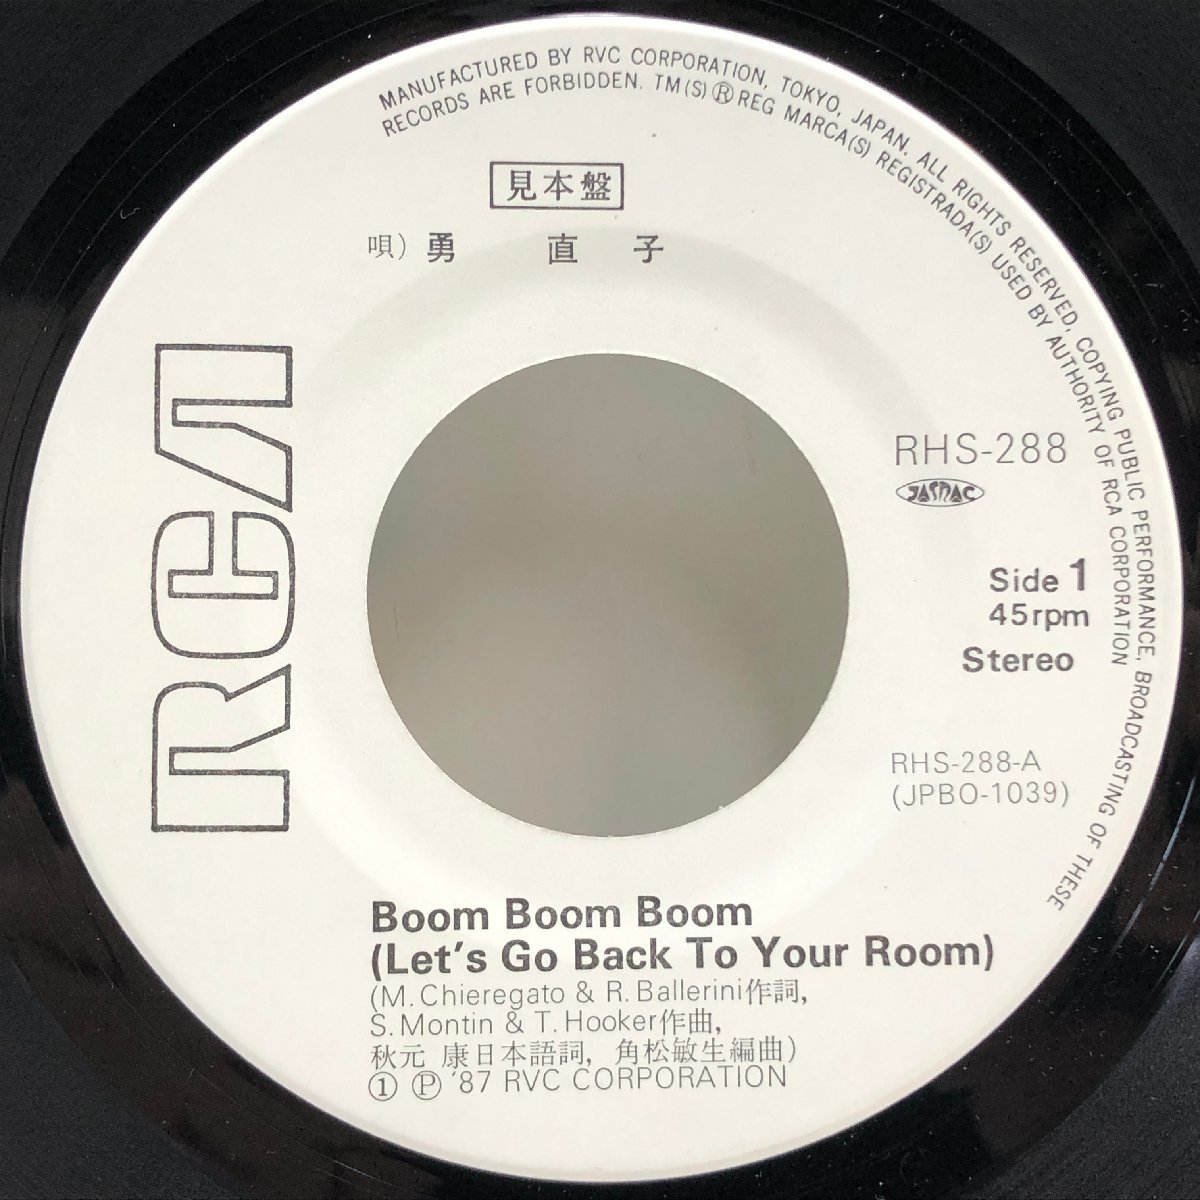 【EP】勇 直子 / BOOM BOOM BOOM(Let's Go Back To Your Room) cw Just A Beatnik / 角松敏生 プロデュース / 見 RCA RHS-288 ▲の画像3